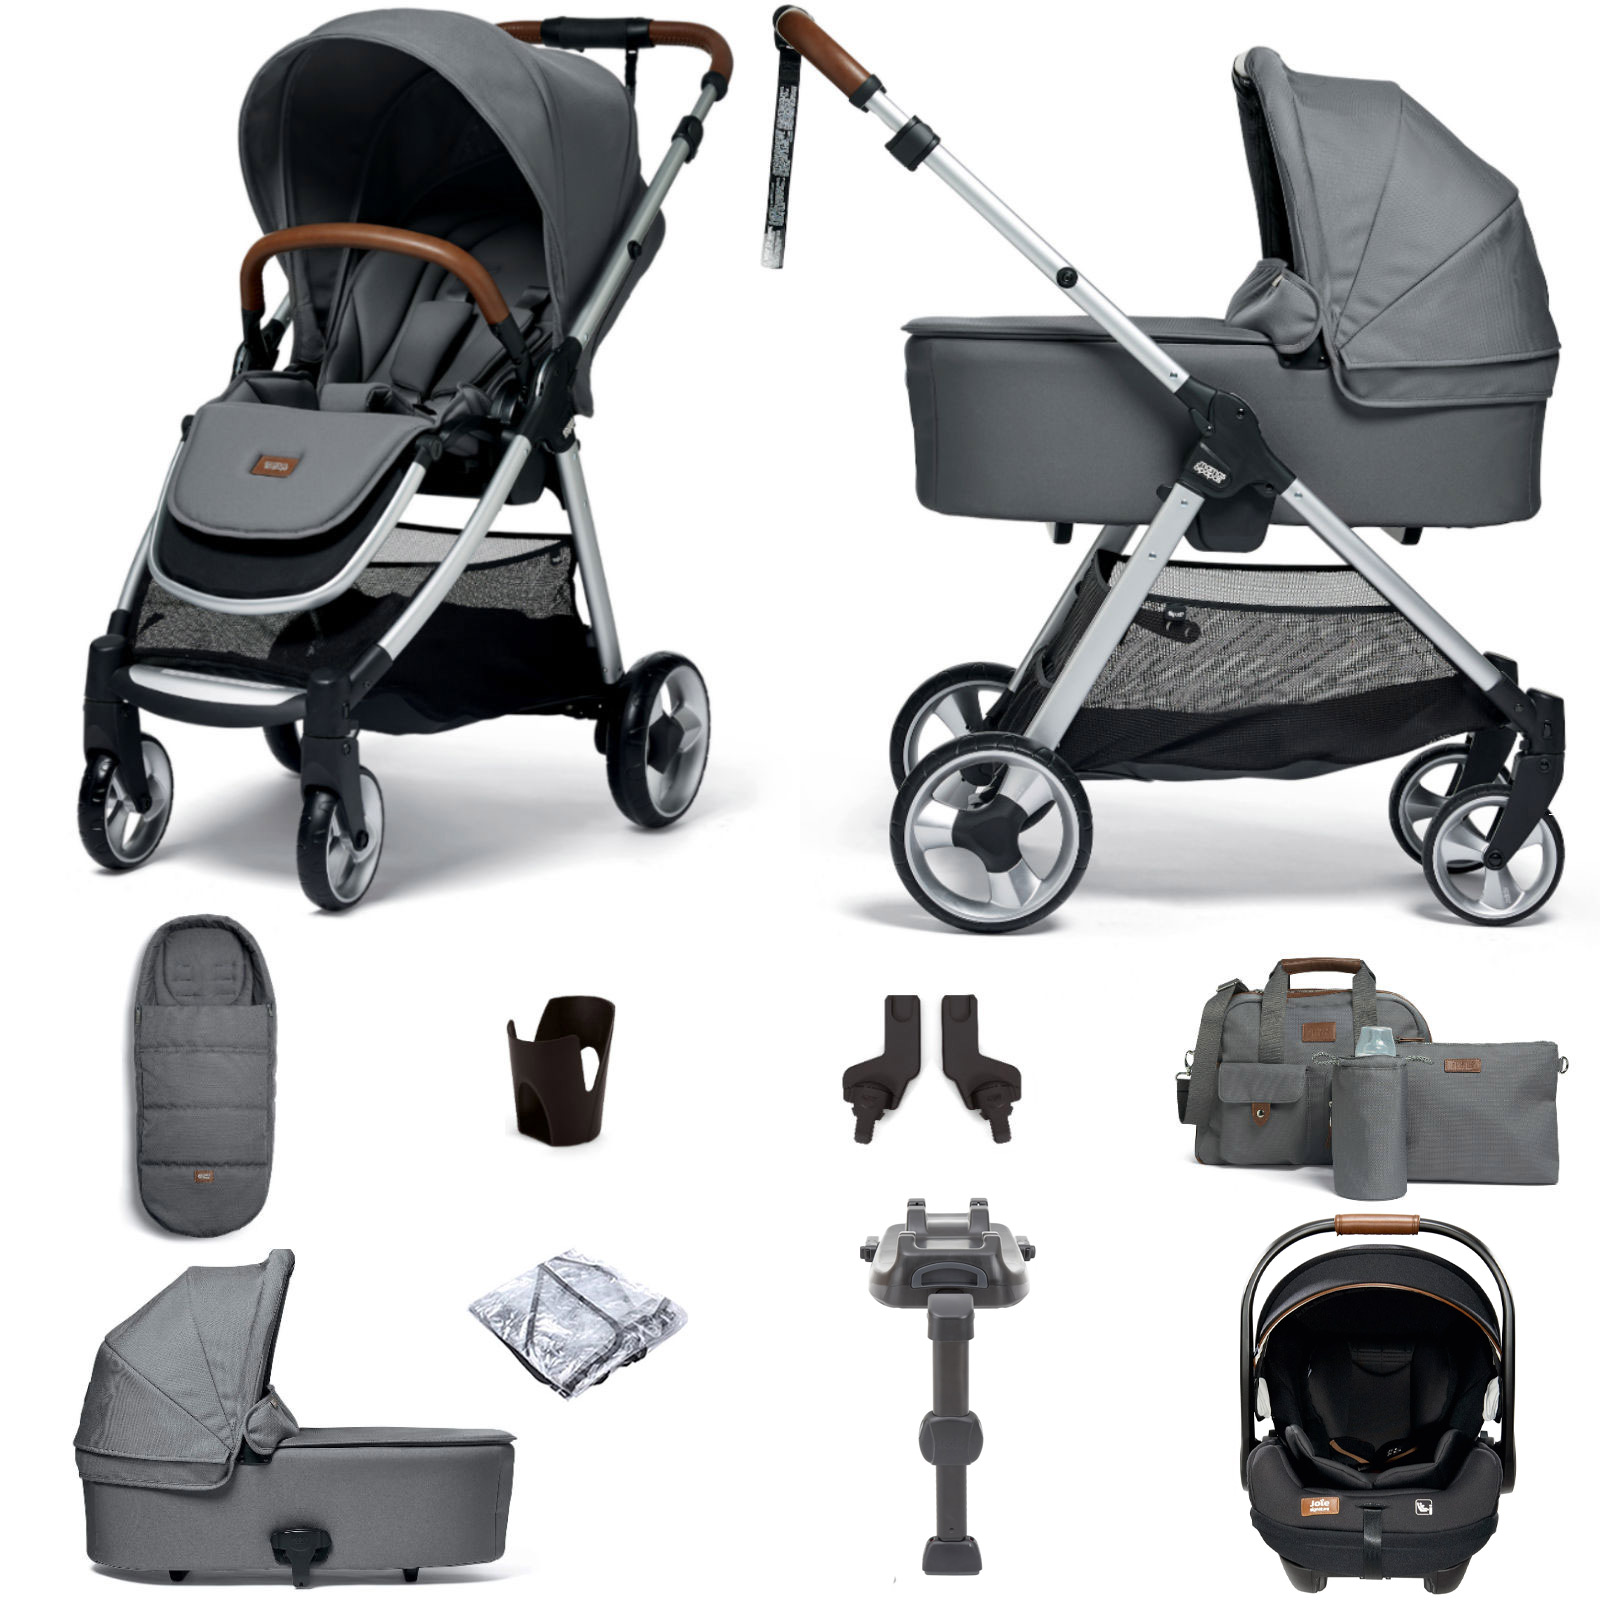 Mamas & Papas Flip XT2 Travel System with Carrycot, Accessories, i-Level Recline Car Seat & i-Base LX 2 - Fossil Grey